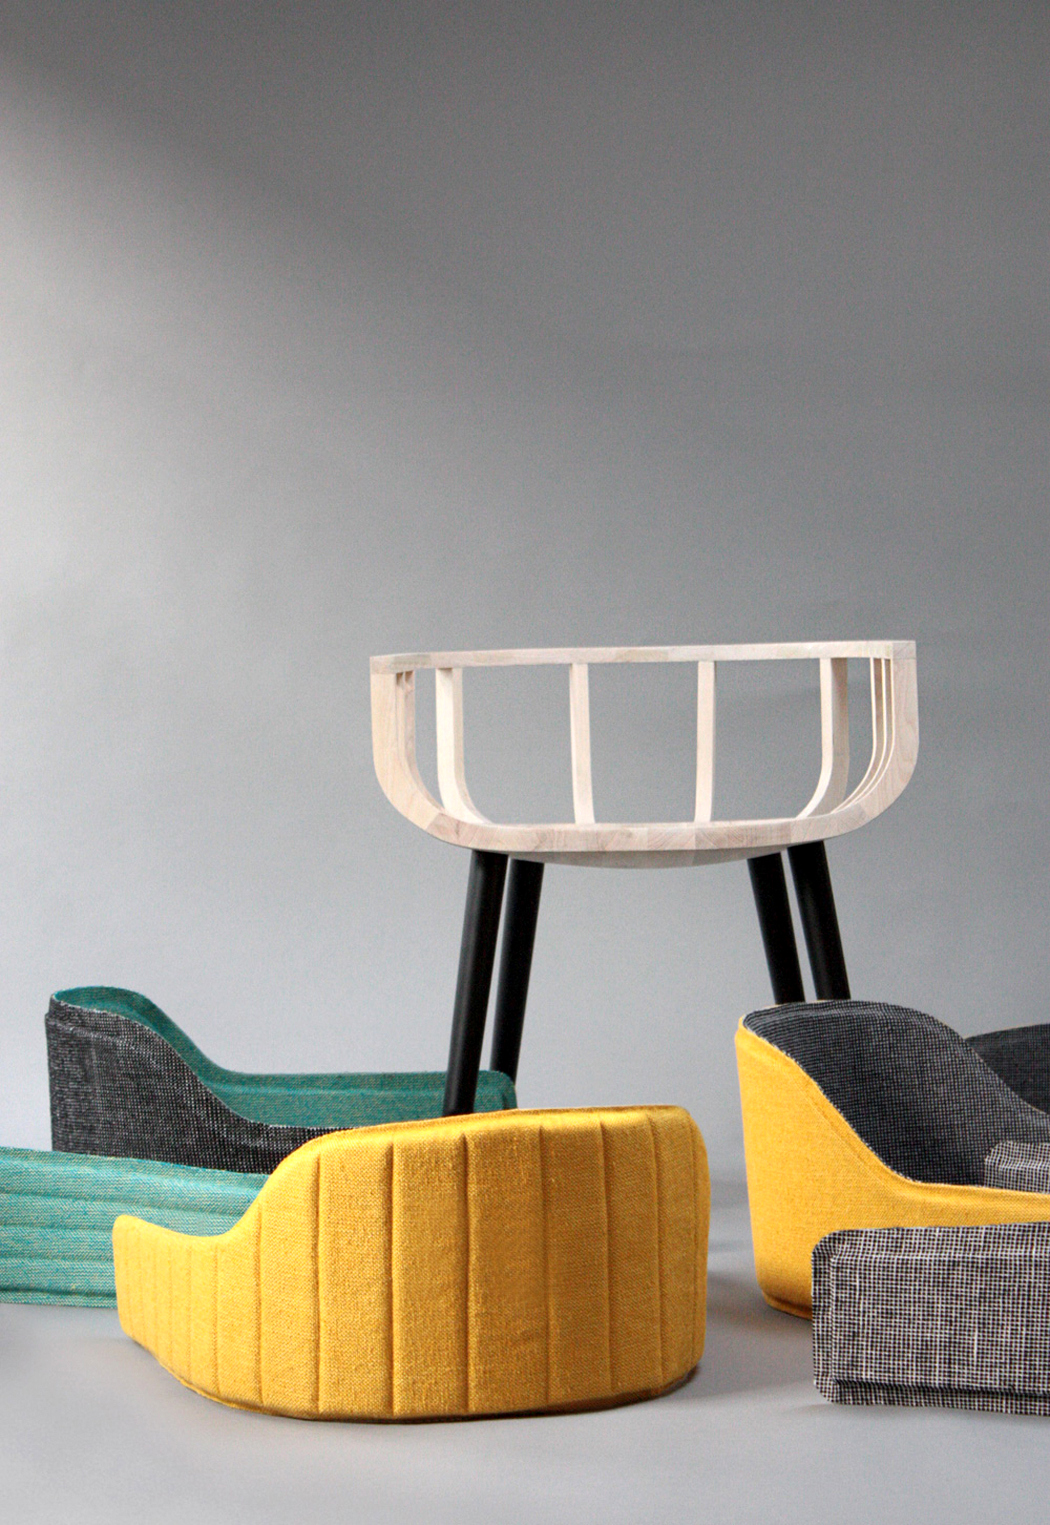 You will get not only a wooden chair but also a pack of fitting upholstery in various colors